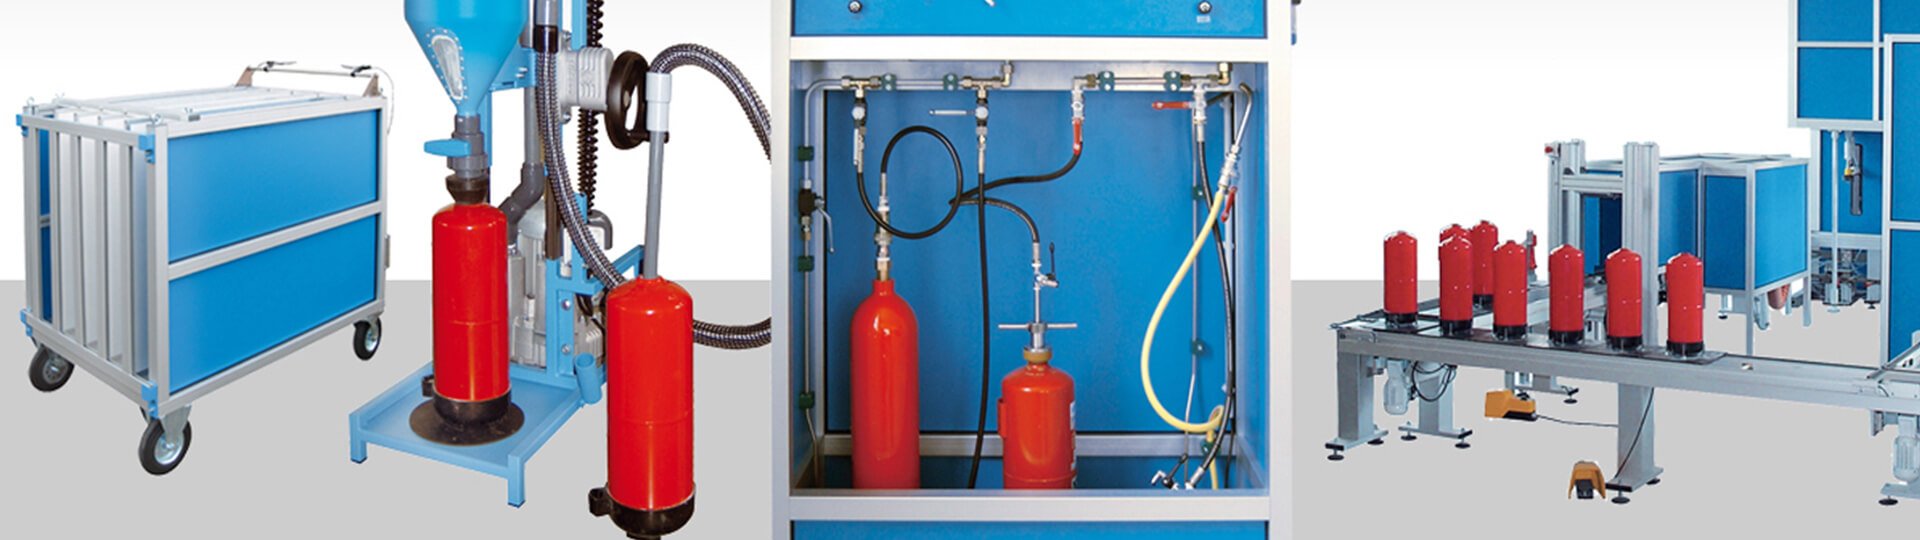 Filling, Testing, Drying, Screwing of Fire extinguishers